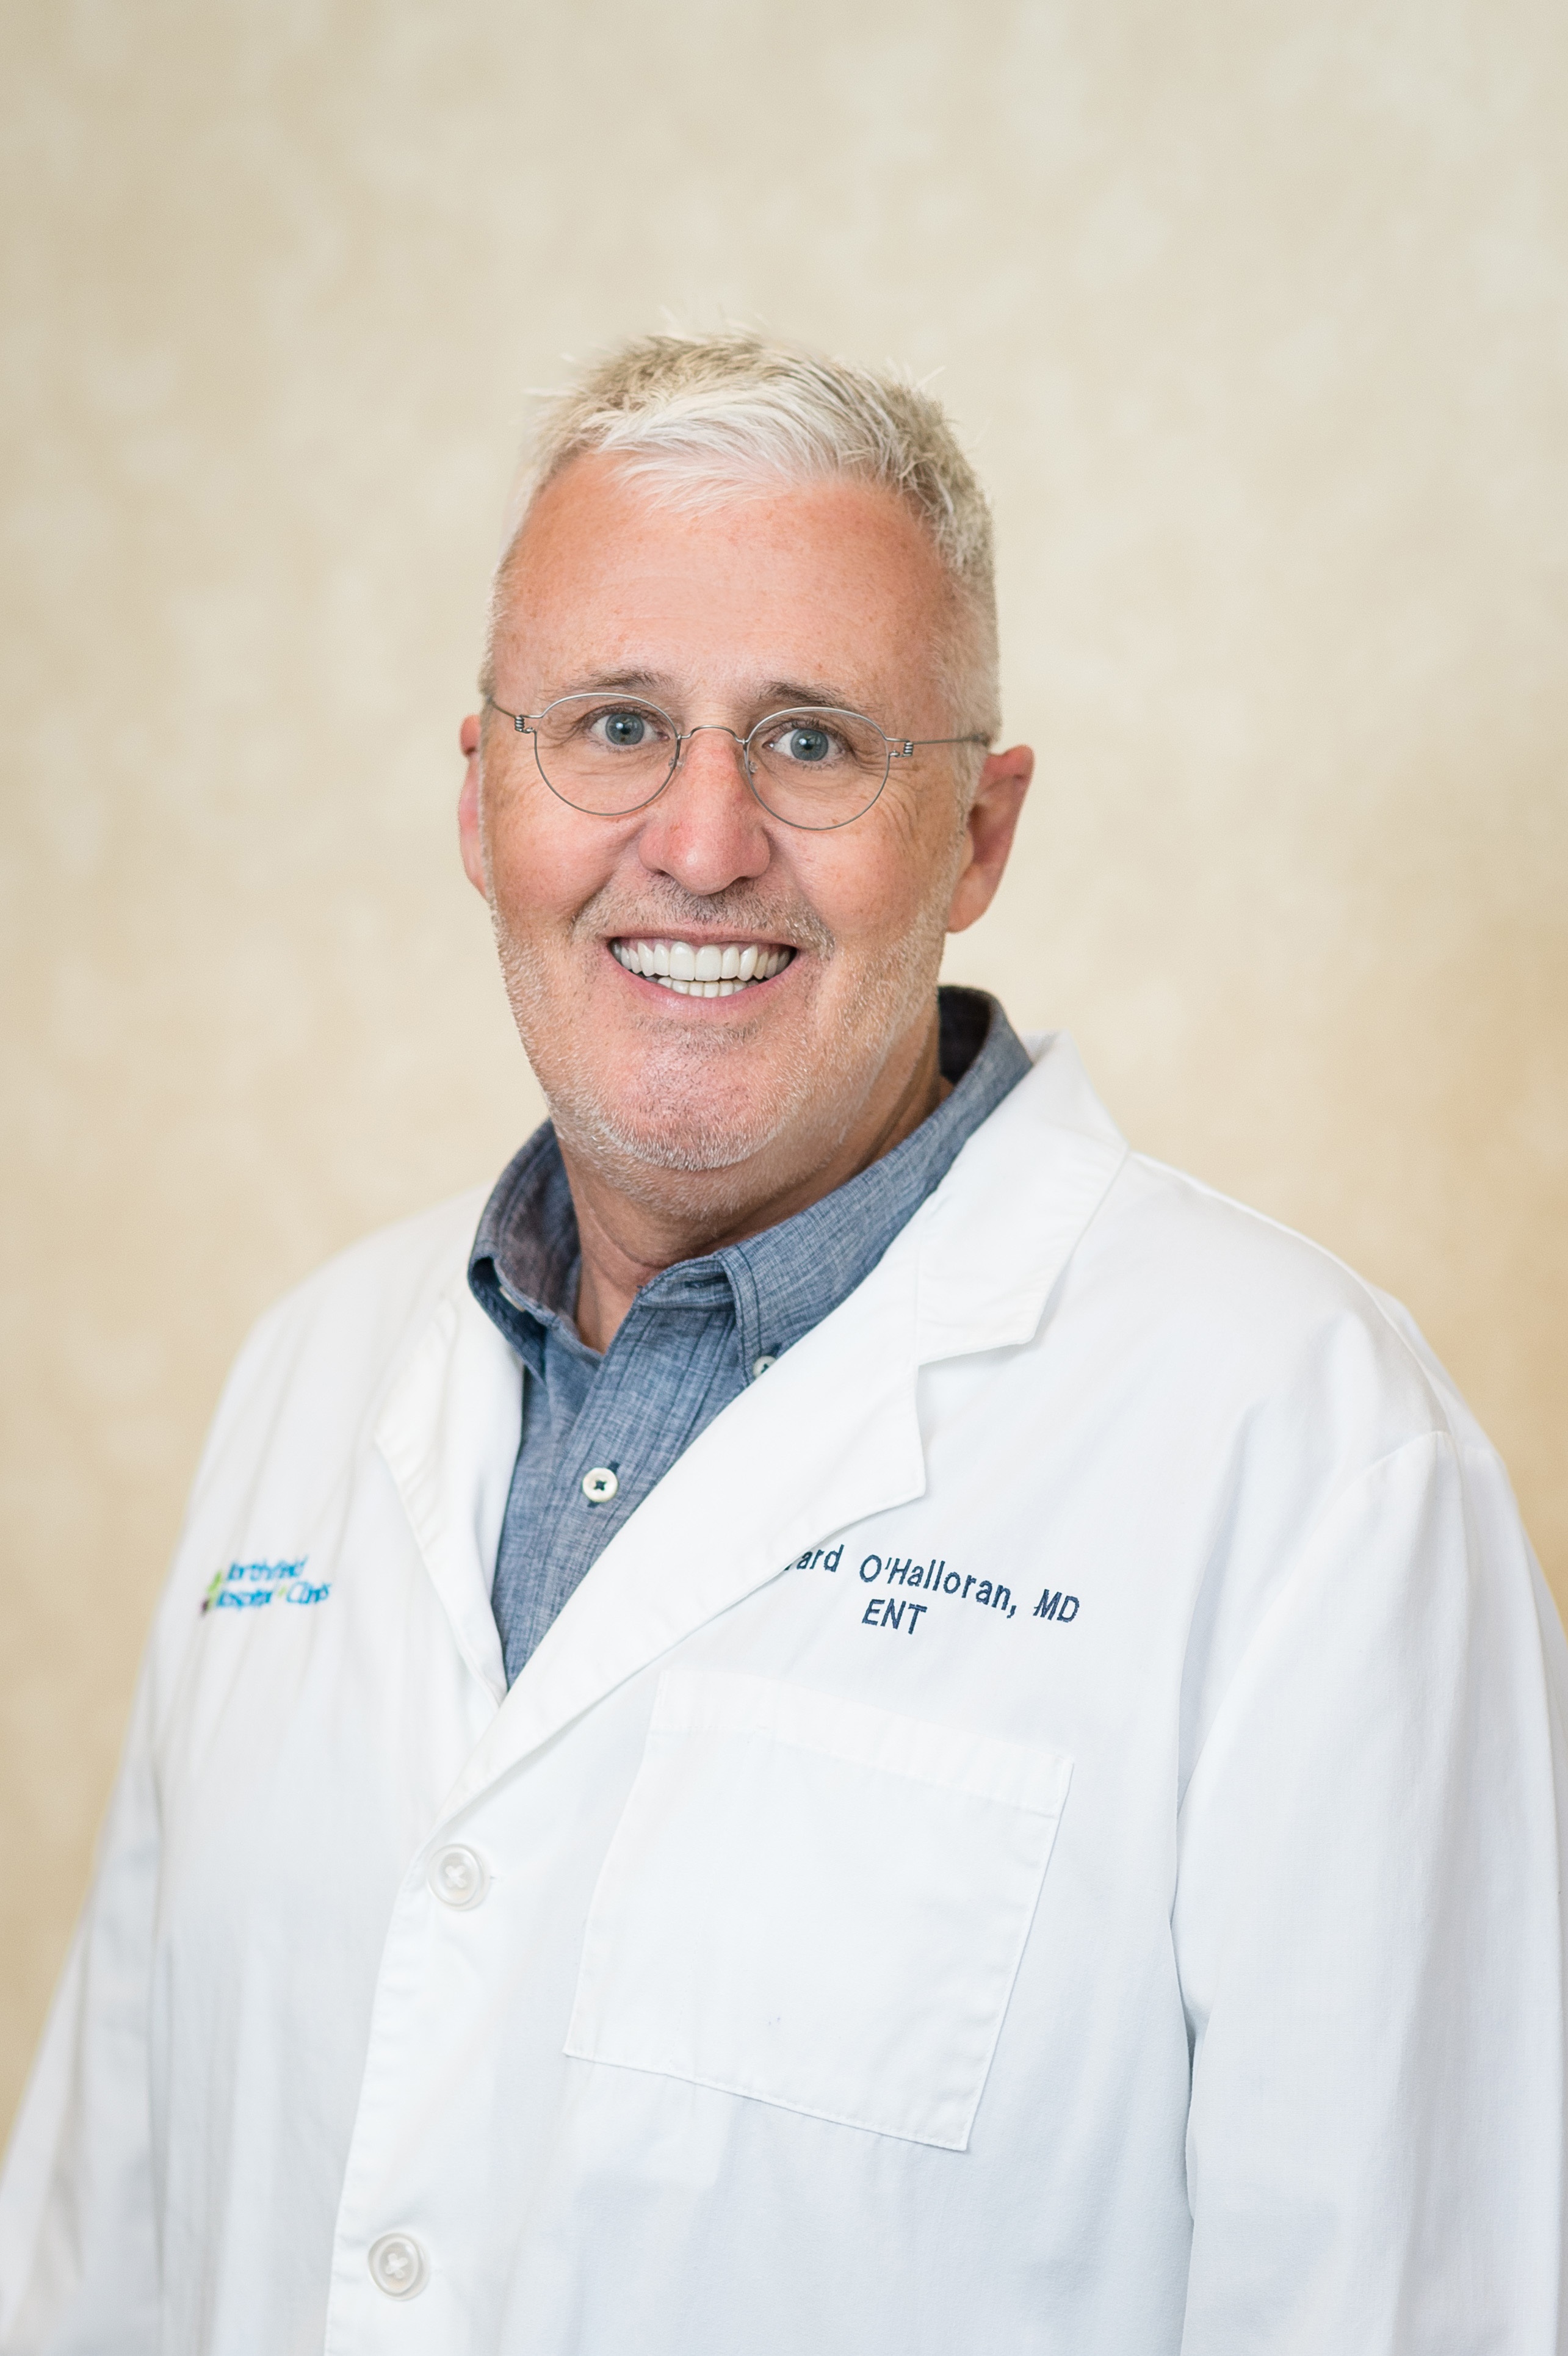 Kids, ear infections, and tubes: Advice from Dr. Gerard O’Halloran